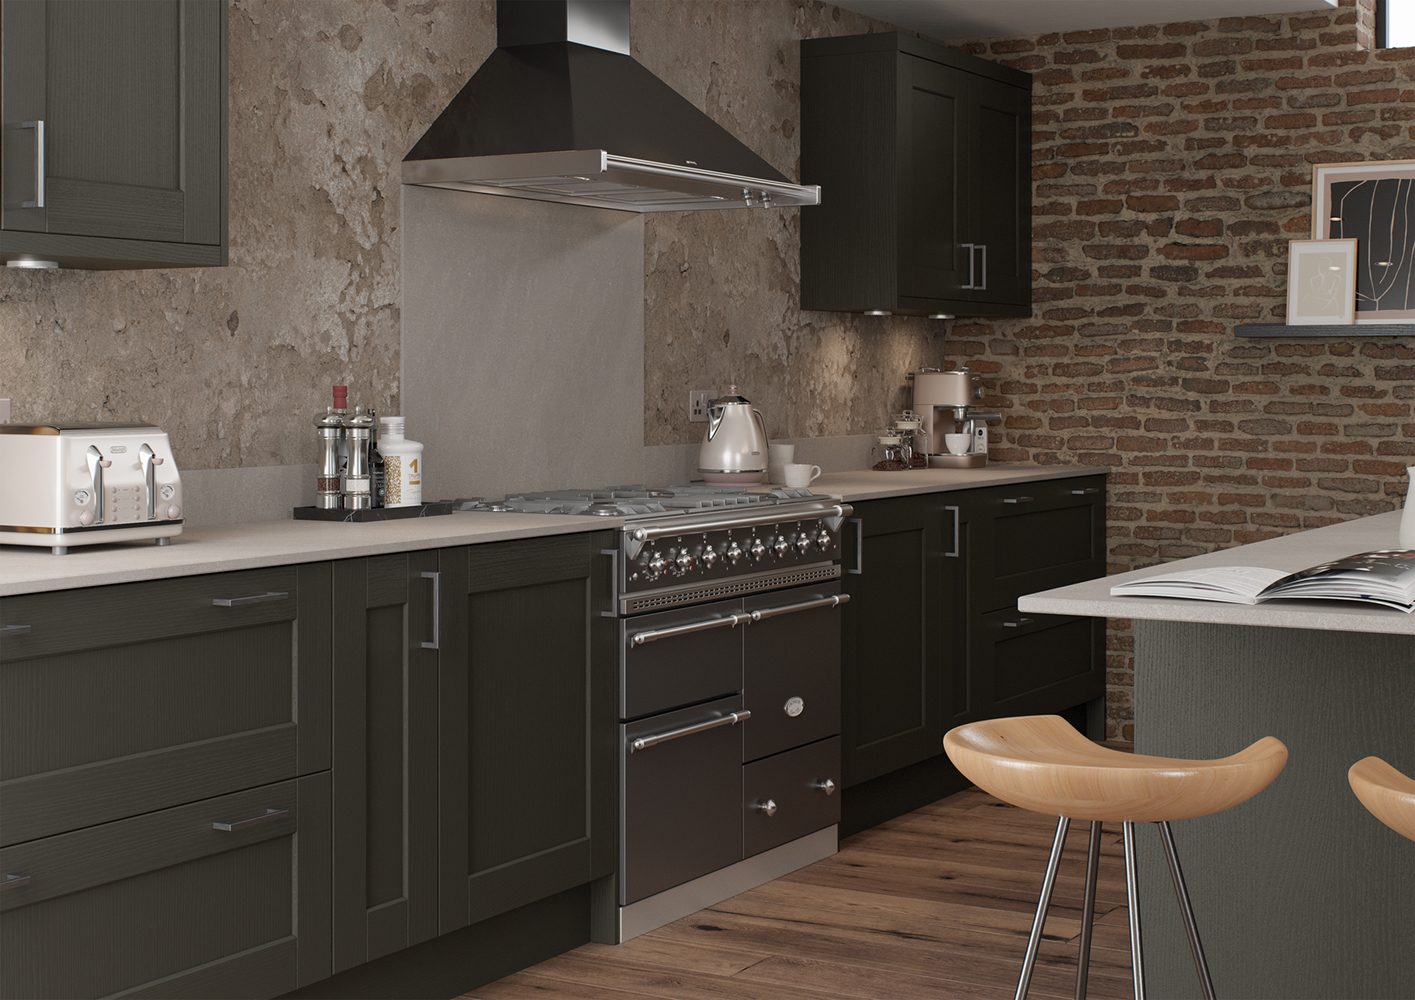 Run of Kendal shaker cabinets in Graphite with oven, made by The Kitchen Depot